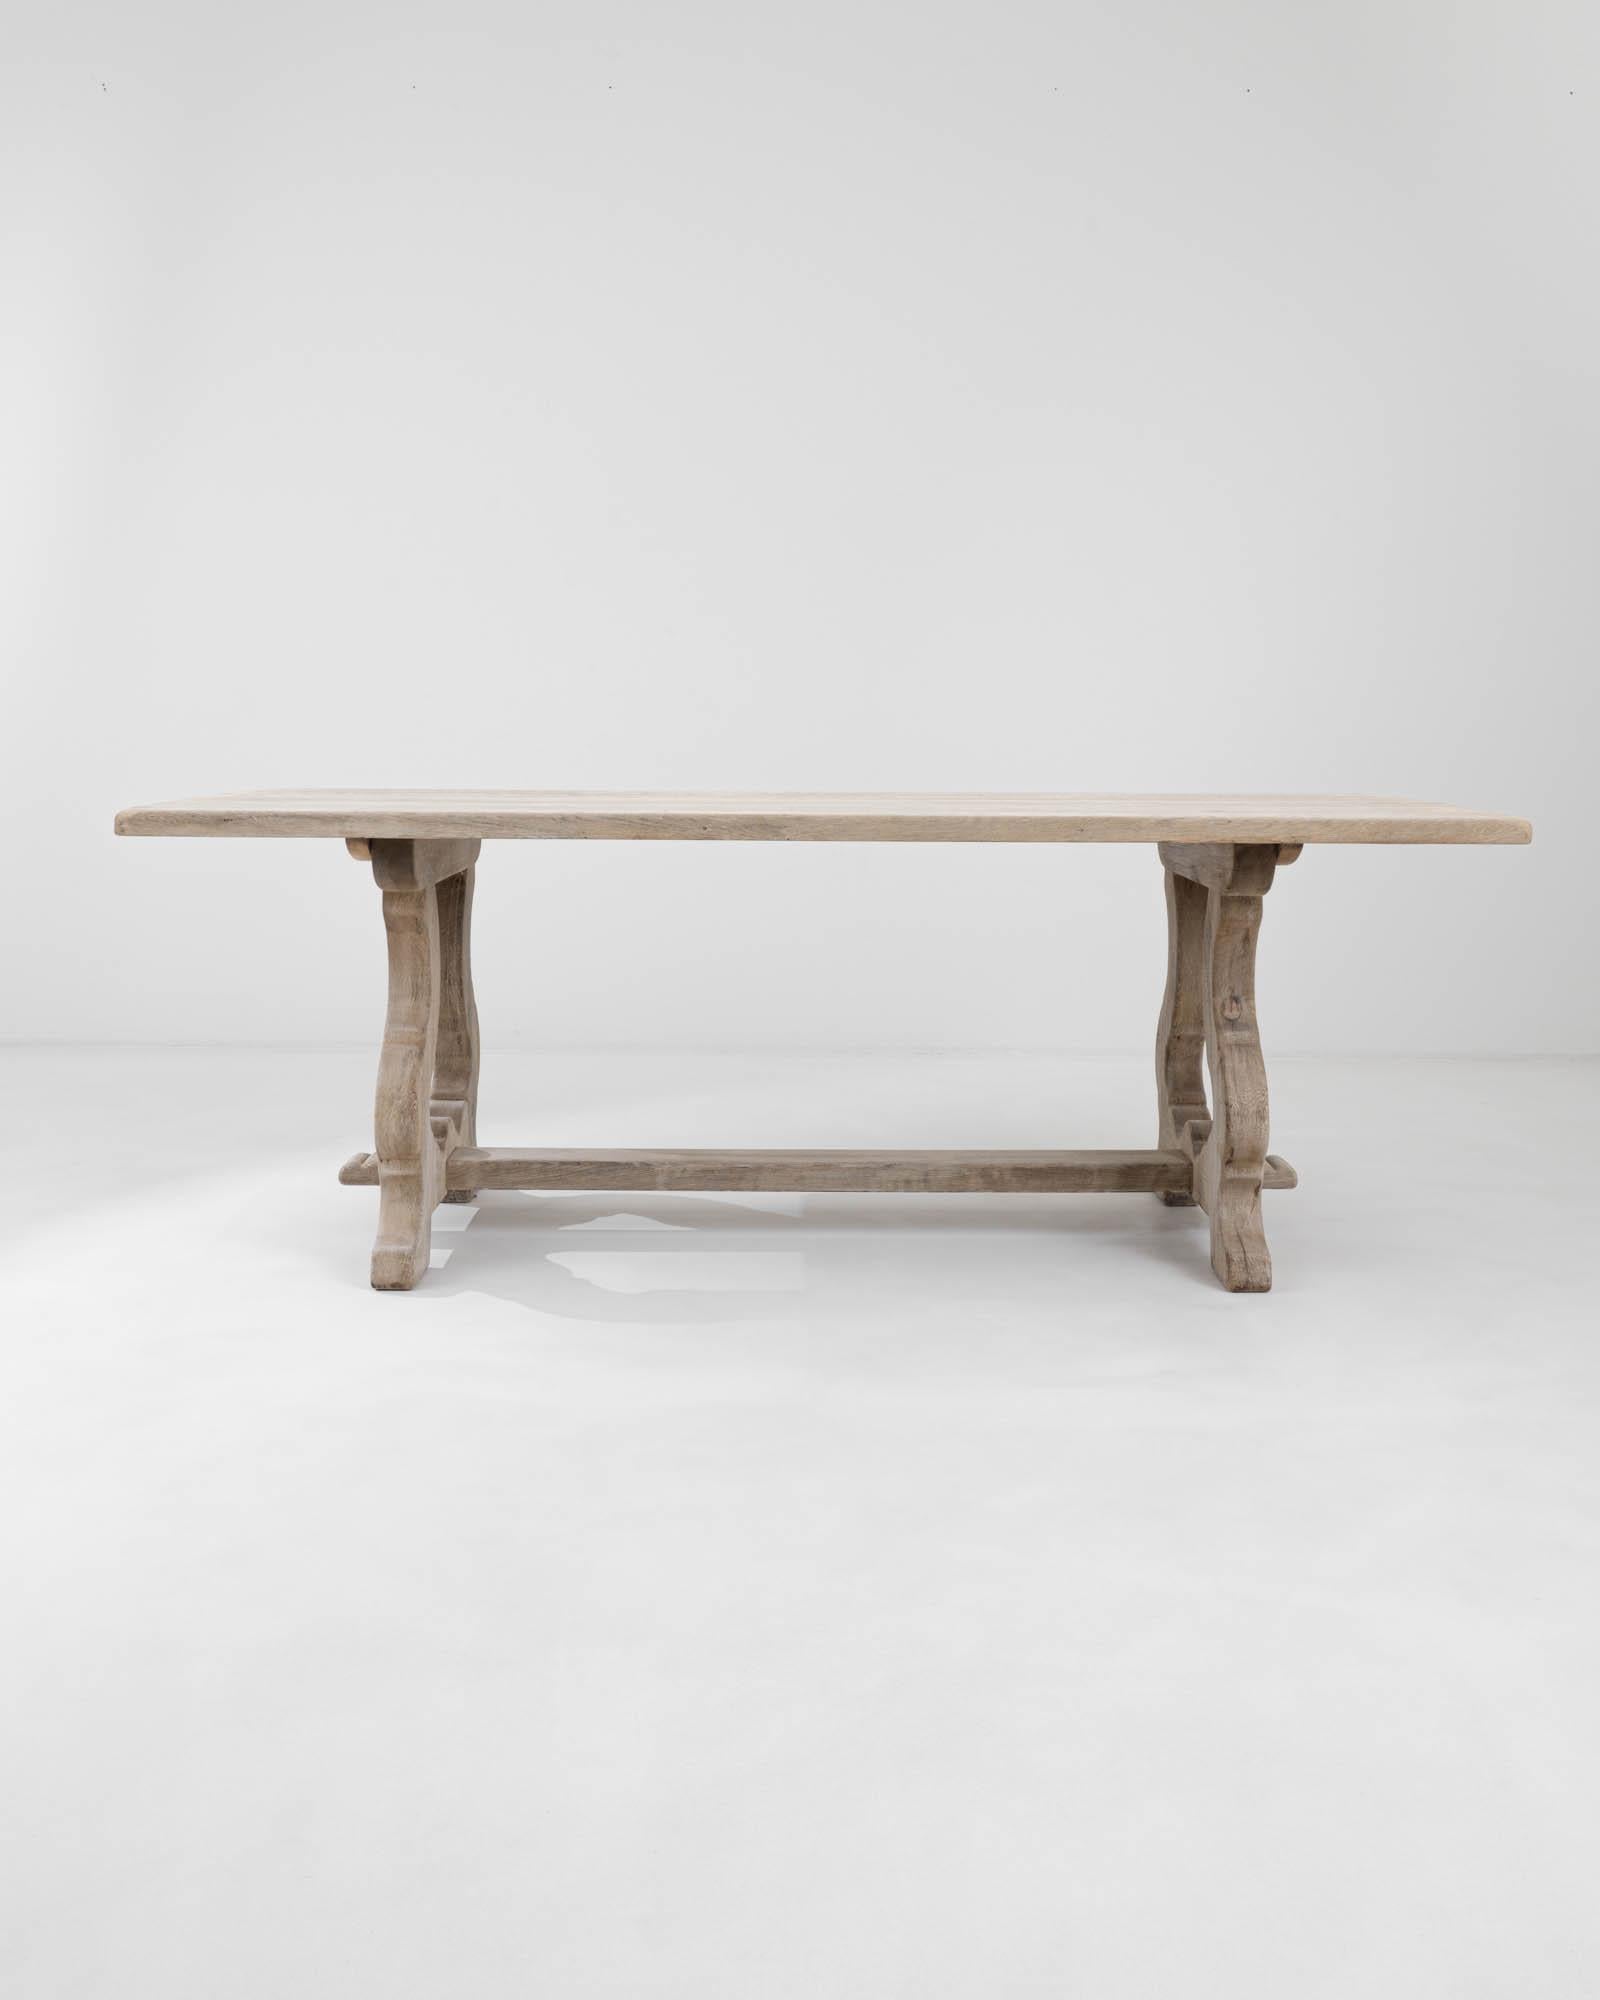 The gracefully flowing outlines of the carved trestle legs define the captivating silhouette of this oak dining table, while offering robust support. Handcrafted from solid European oak in 20th-century France, this table showcases a lengthy, smooth